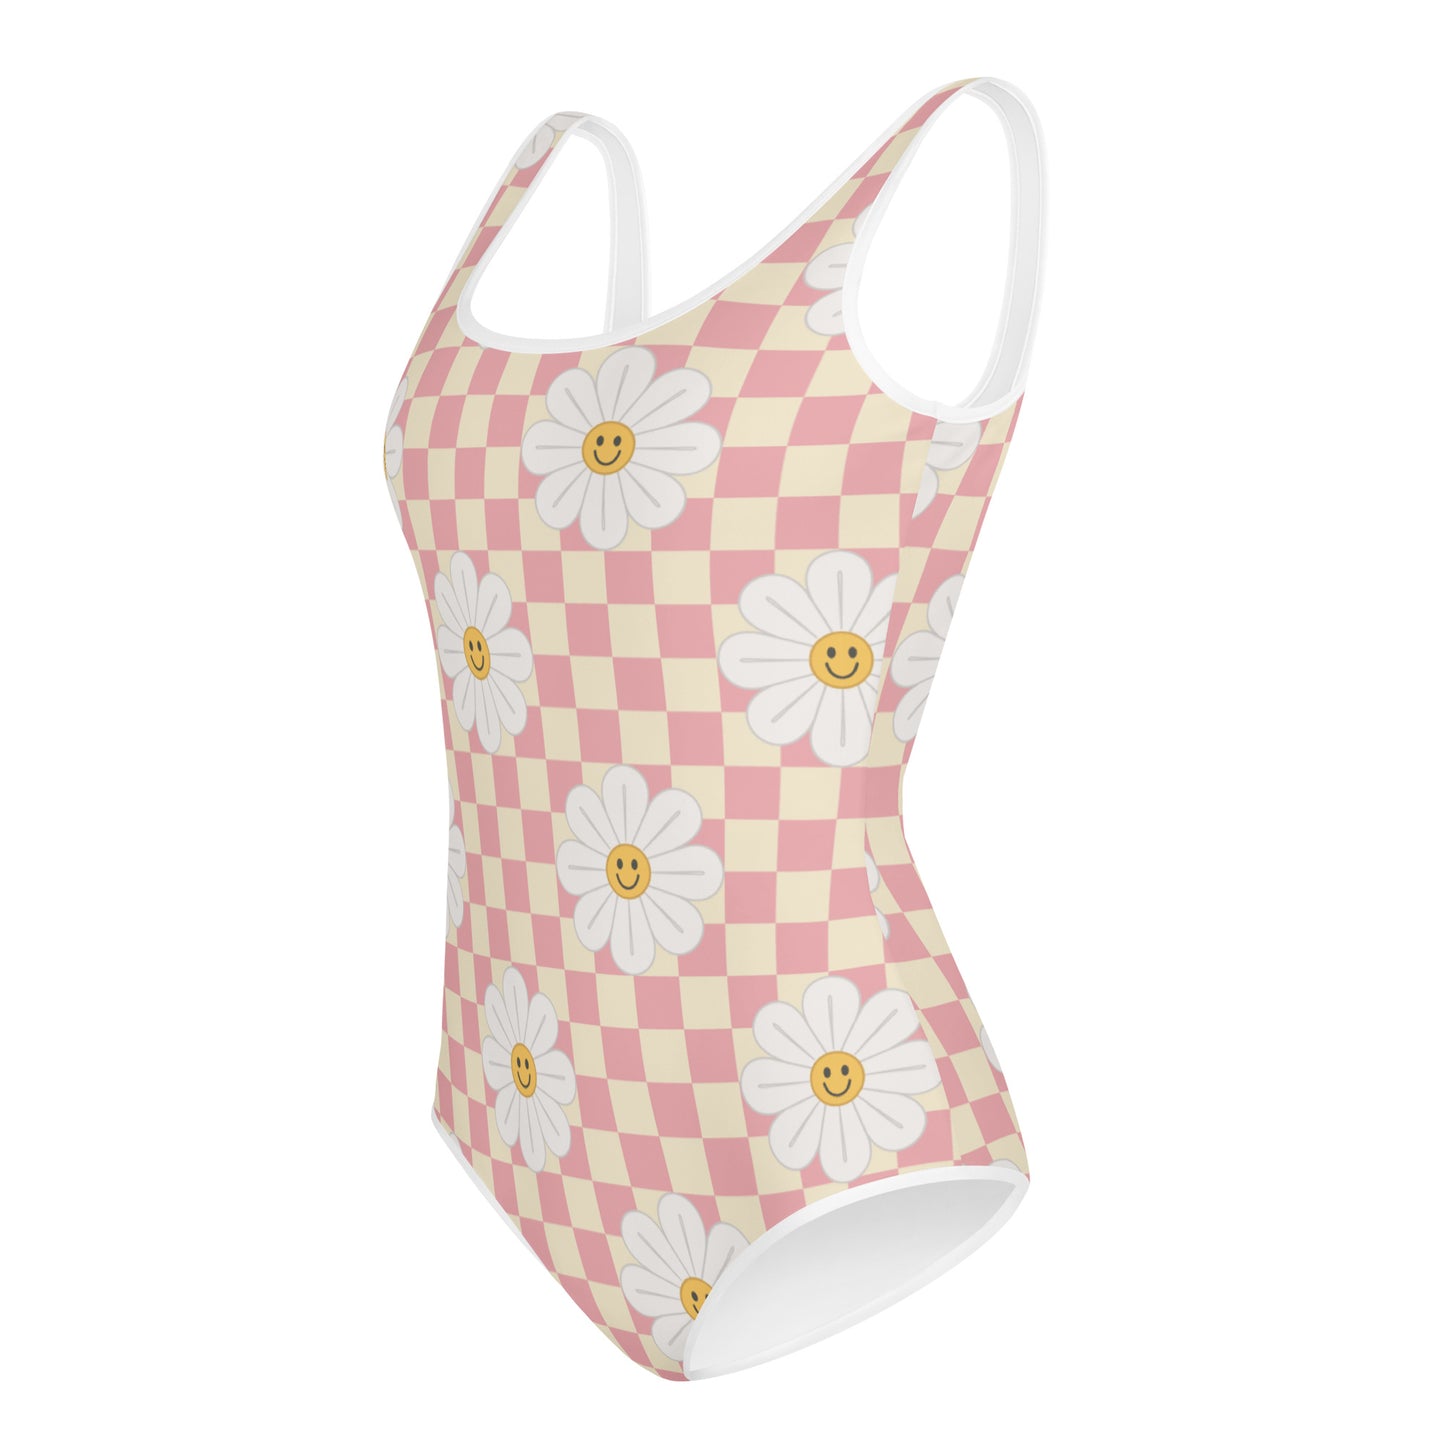 Groovy Checkered Girls Swimsuits (8 - 20), Pink Chamomile Flower Kids Jr Junior Tween Teen One Piece Bathing Suit Young Swimwear Starcove Fashion